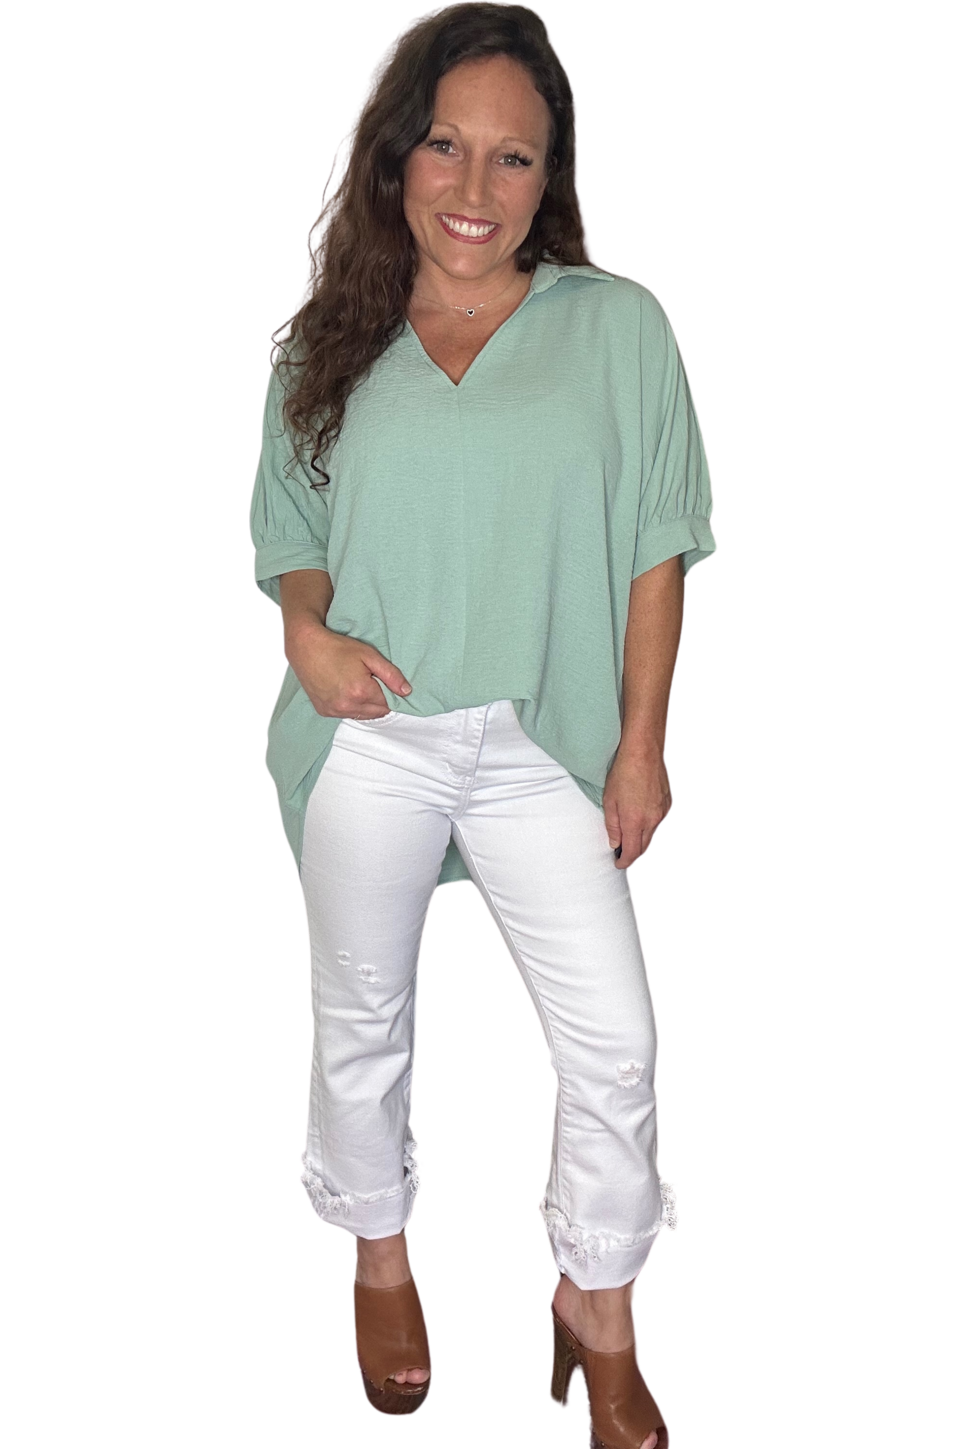 Jodifl - Solid Color Collared Top with Short Dolman Sleeves and Banded Cuffs - Vintage Dragonfly Boutique